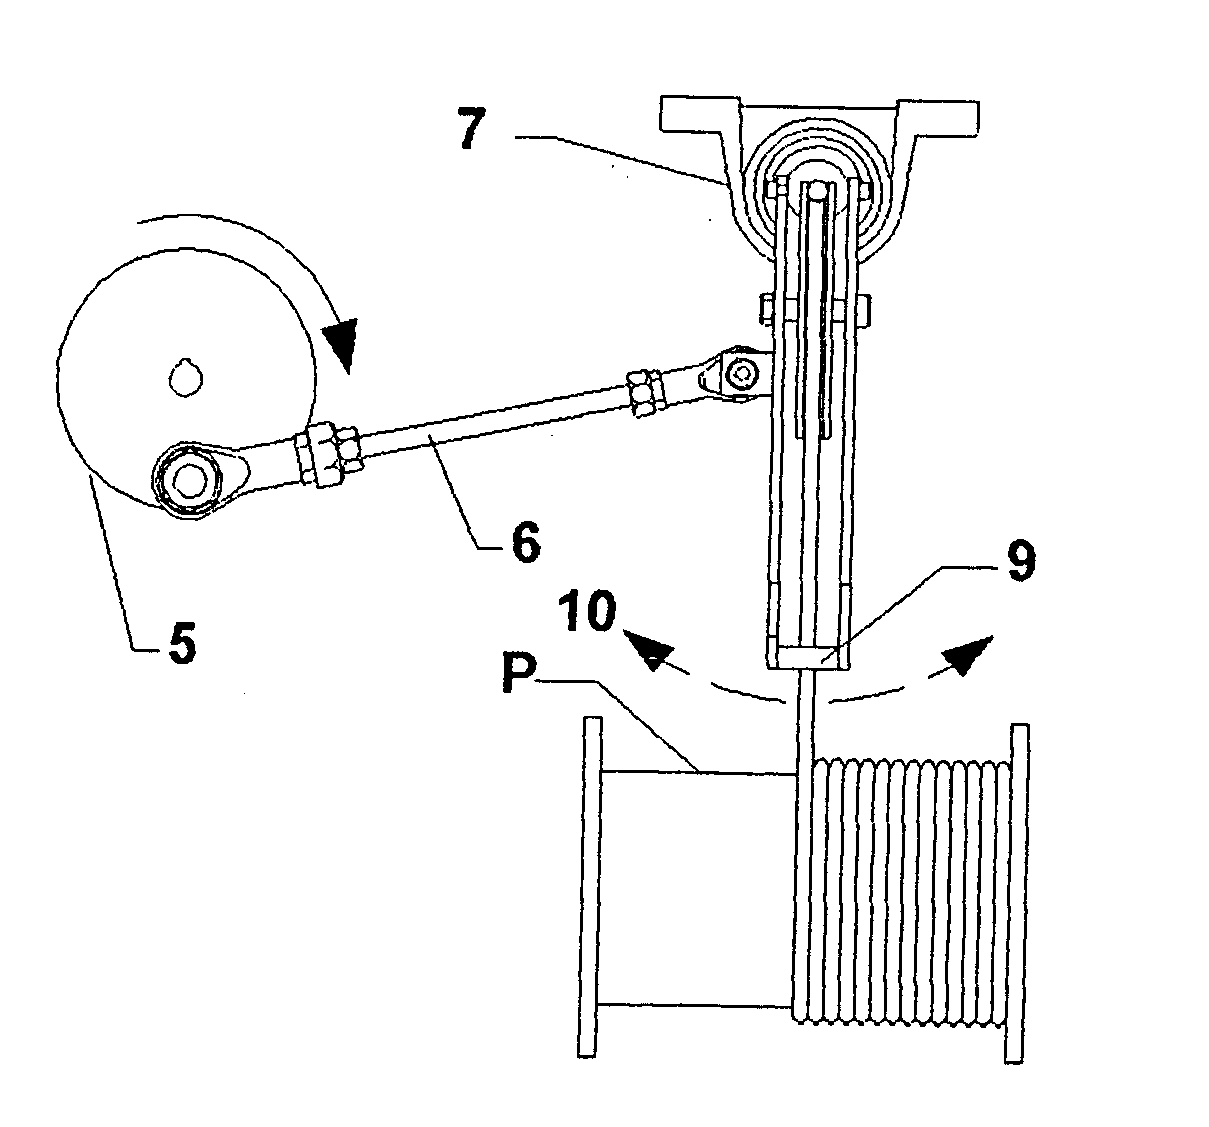 Device for traversing a flexible linear product for spooling